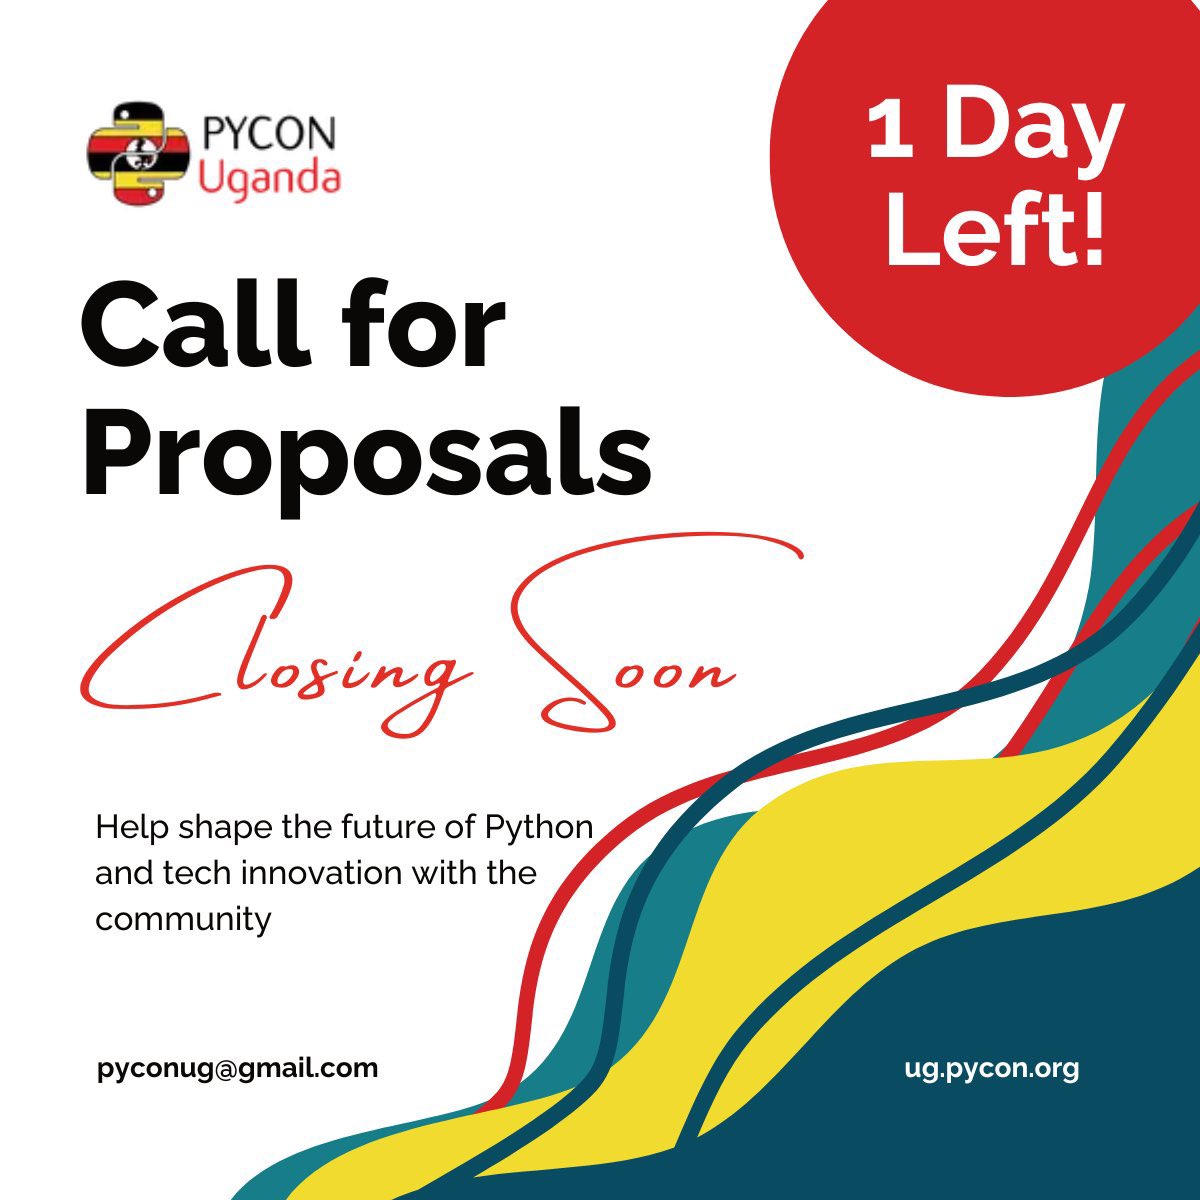 Last year, I spoke at the 1st @PyConUganda.

It was an amazing experience for me. I met incredibly talented folks that now inspire me.

Be a speaker at the 2nd PyCon this year, submit a talk here: papercall.io/pyconug

PS: Ping me if you need a co-speaker.

#PyConUganda2024